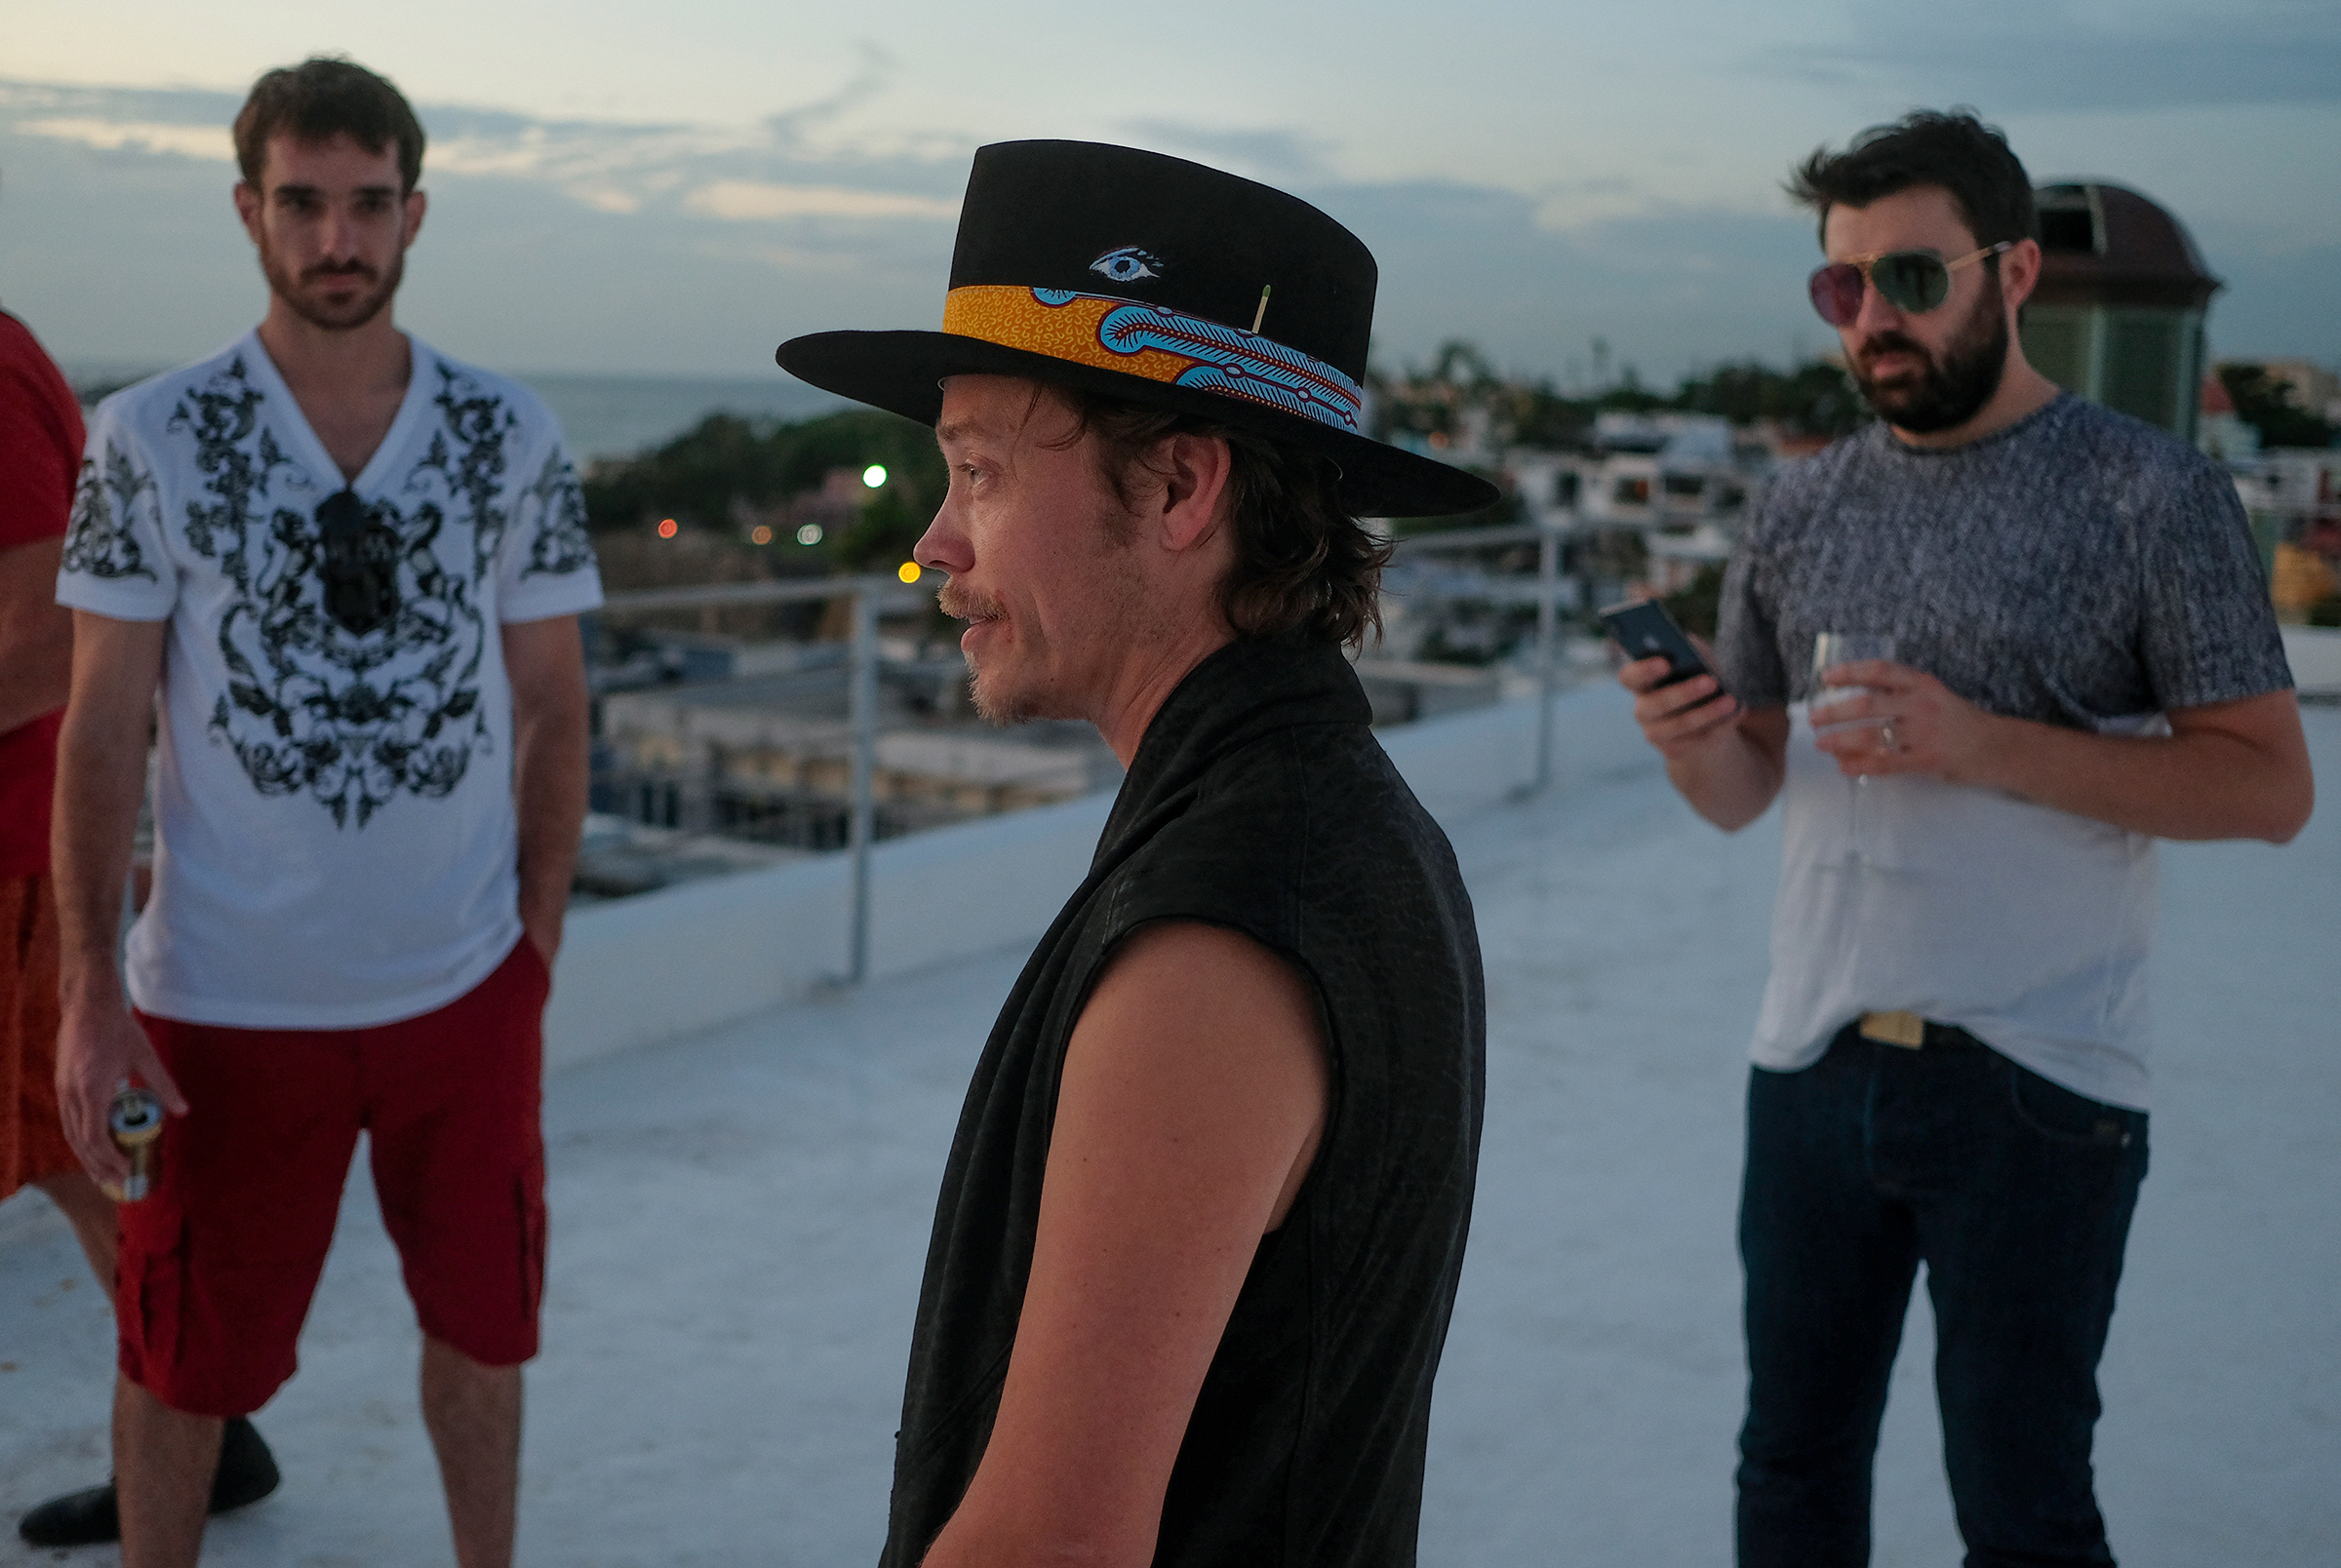 Brock Pierce, center, with Josh Boles, left, and Matt Clemenson on the roof of the Monastery Art Suites, which they rented out as a headquarters for their cryptocurrency business, in San Juan, Puerto Rico, January 2018. Dozens of entrepreneurs, made newly wealthy by virtual currencies, moved to the island to avoid taxes and to build a society that runs on blockchain. (José Jiménez-Tirado—The New York Times/Redux)